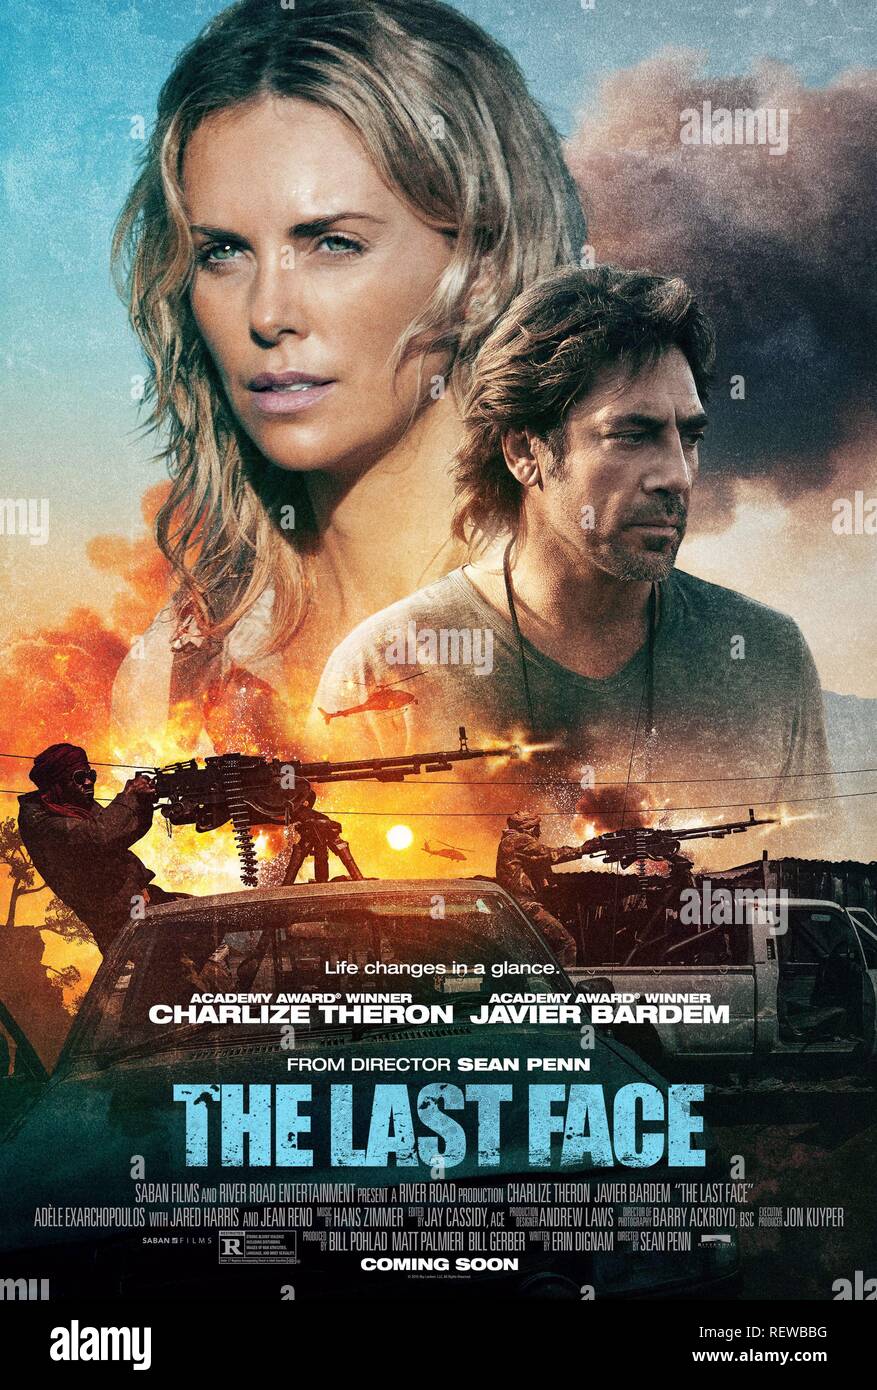 Charlize Theron Javier Bardem Poster The Last Face 2016 Stock Photo Alamy Eur 5.95 to eur 10.36. https www alamy com charlize theron javier bardem poster the last face 2016 image232897716 html